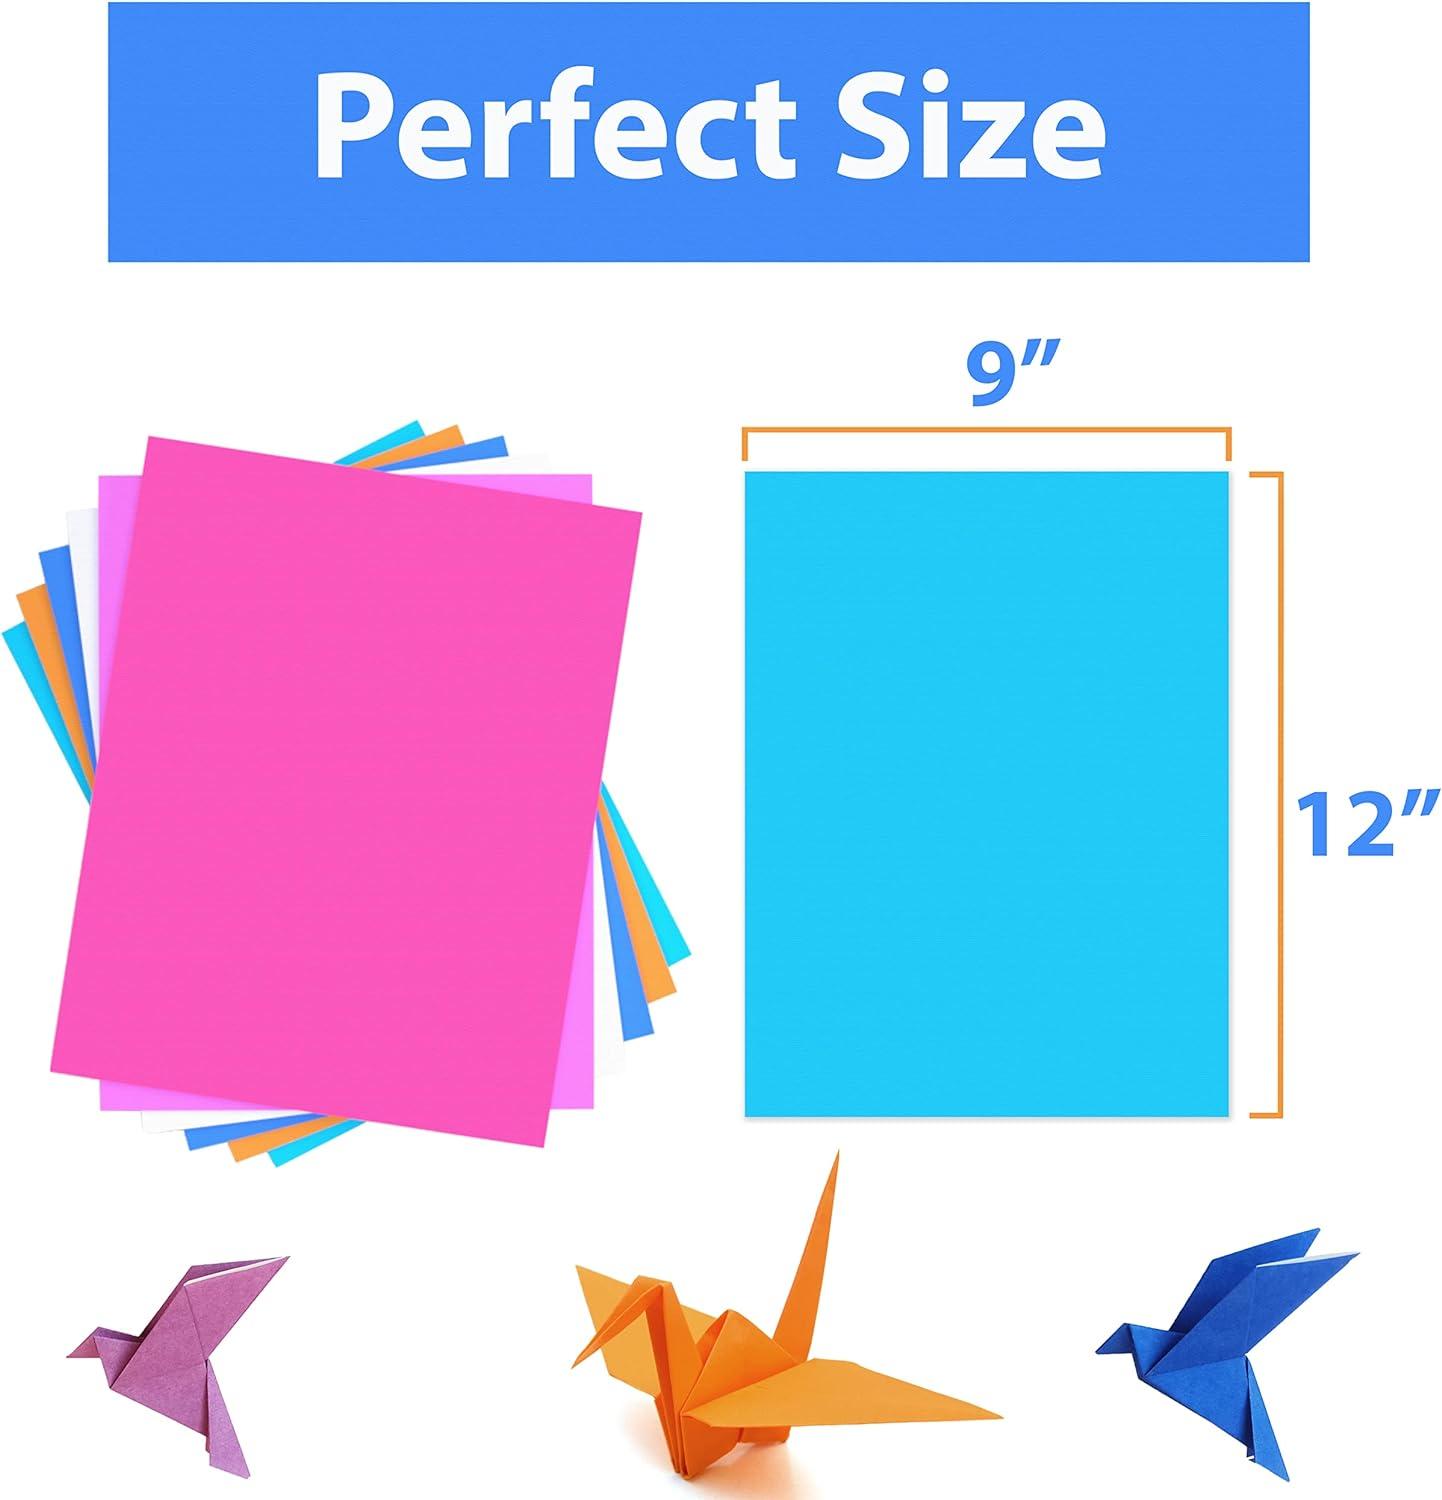  Construction Paper Colored Paper, A4 9 x 12, 1000 Sheets,  Heavyweight Coloring Craft Paper for Kids Bulk School Supplies Art (Fresh  Color)